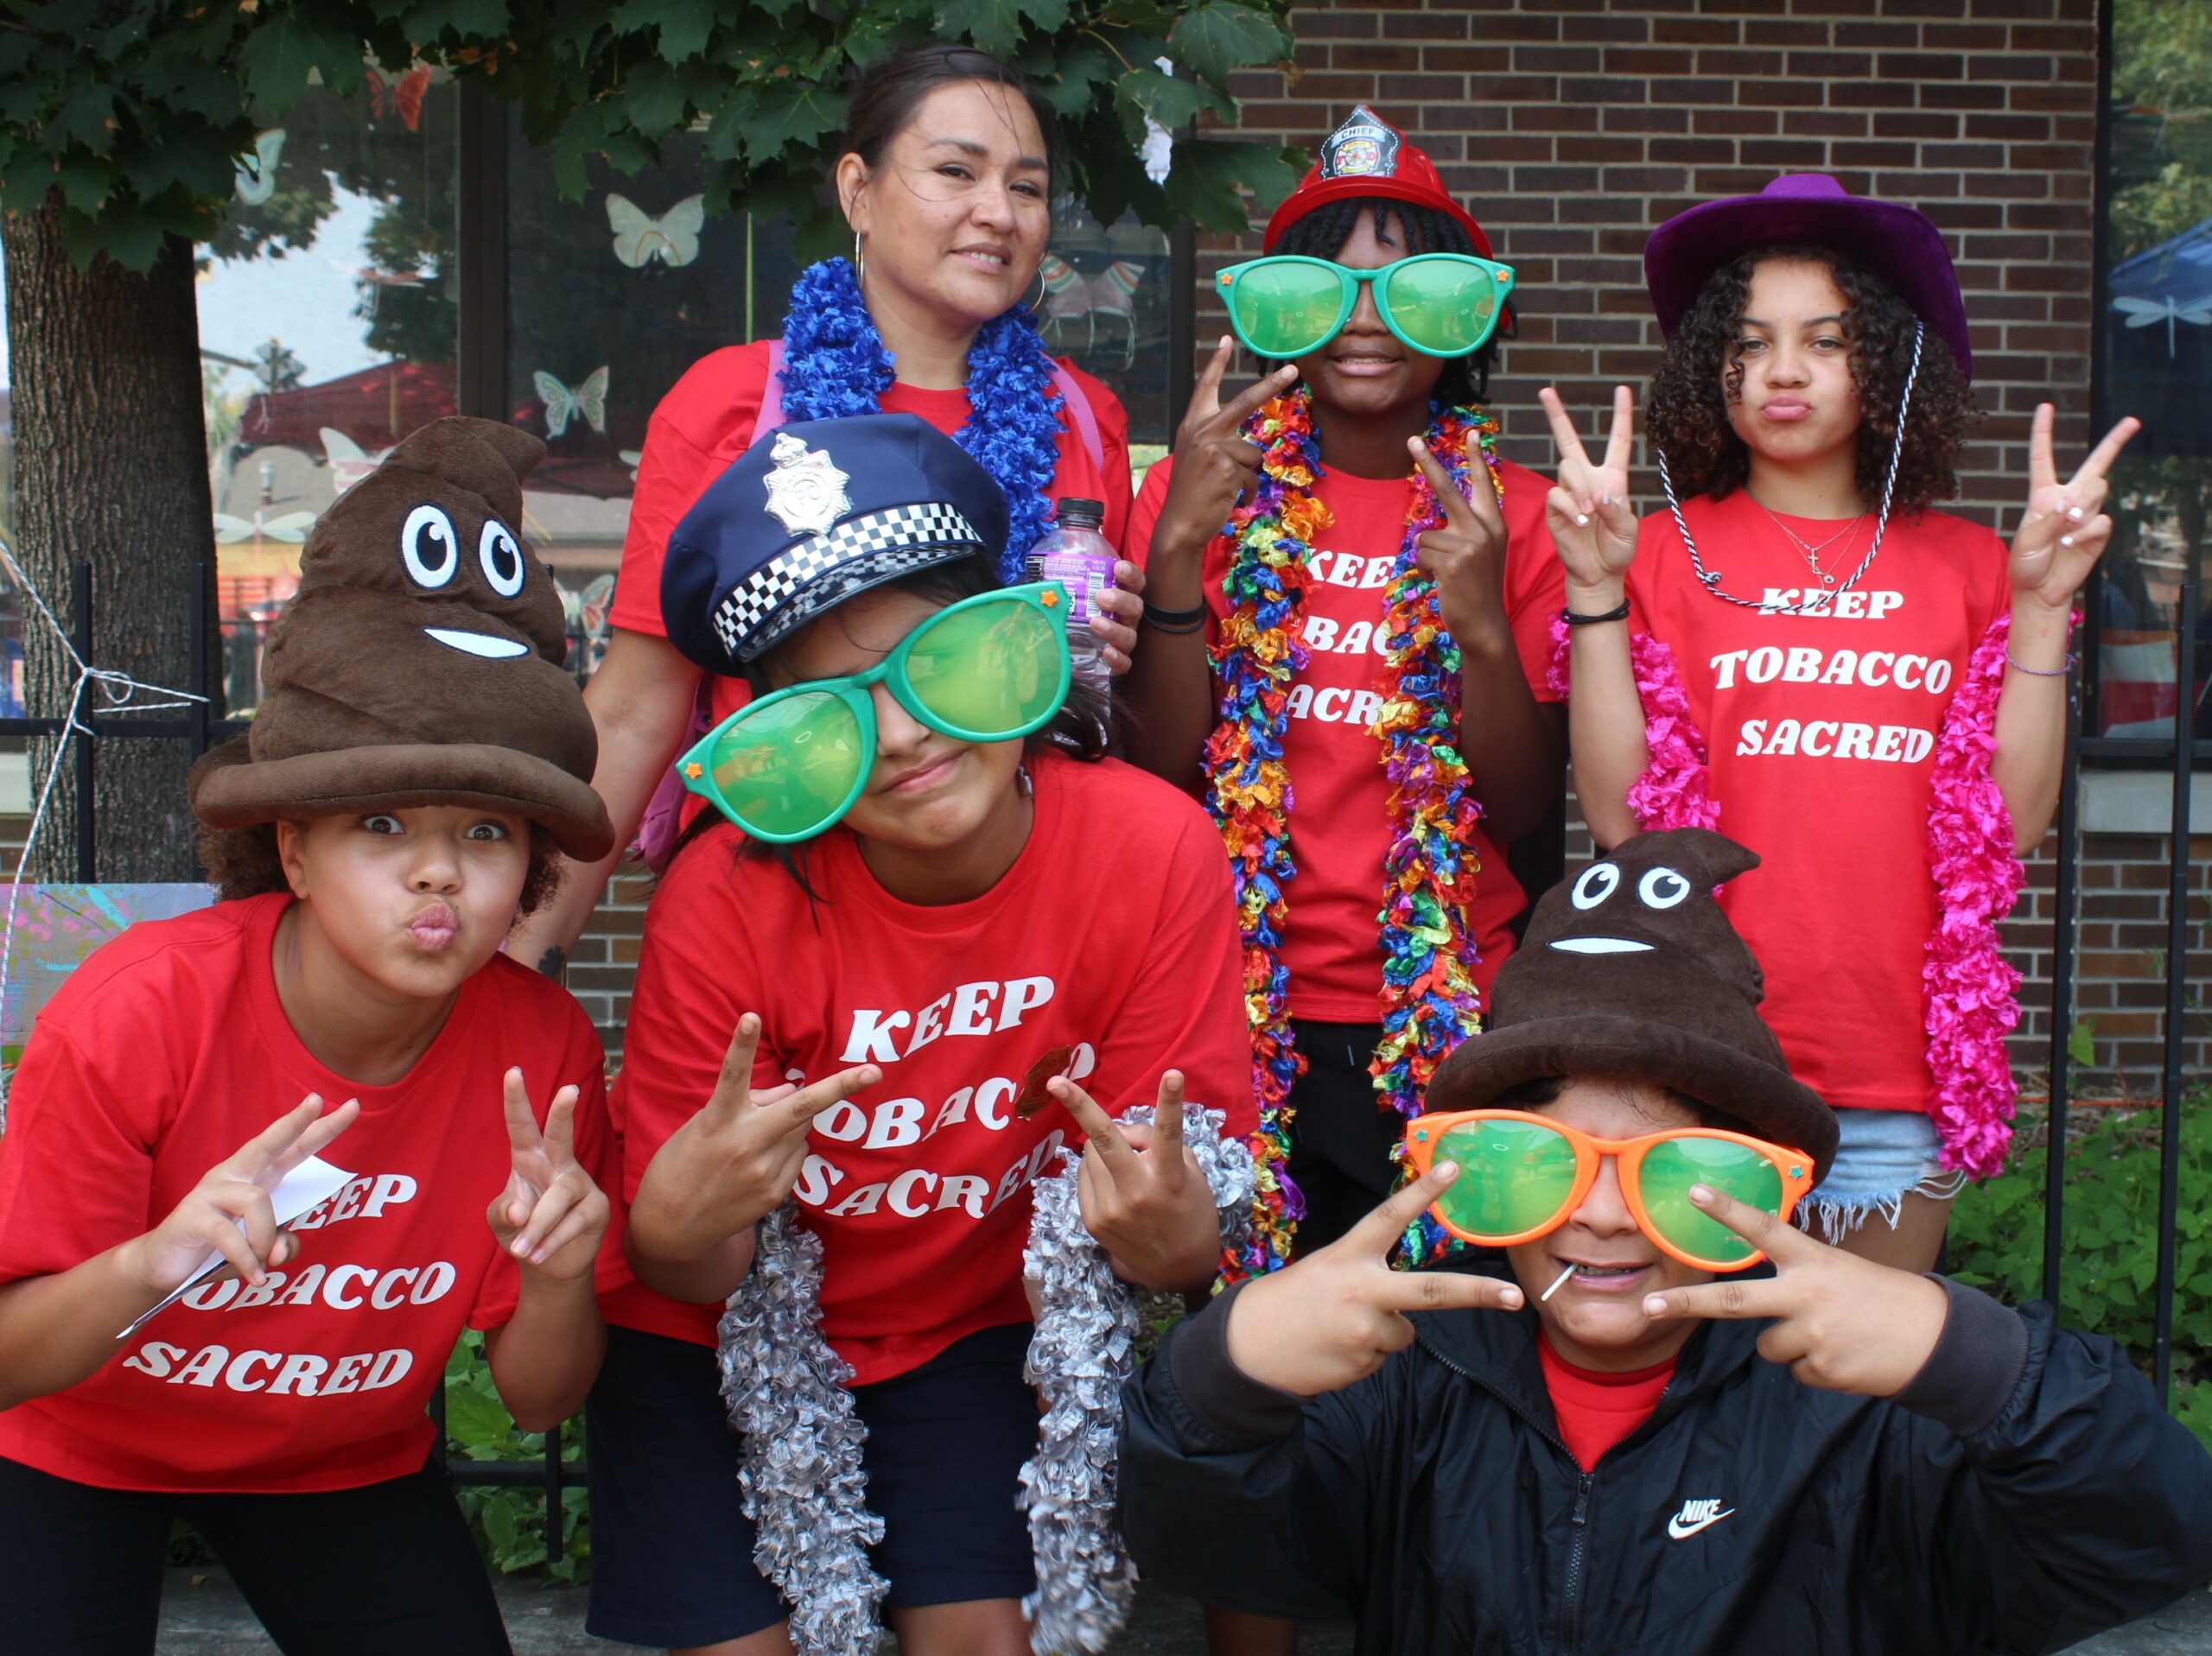 A group of 6 Native teenagers wear read tshirts and wear costume hats and large sunglasses.